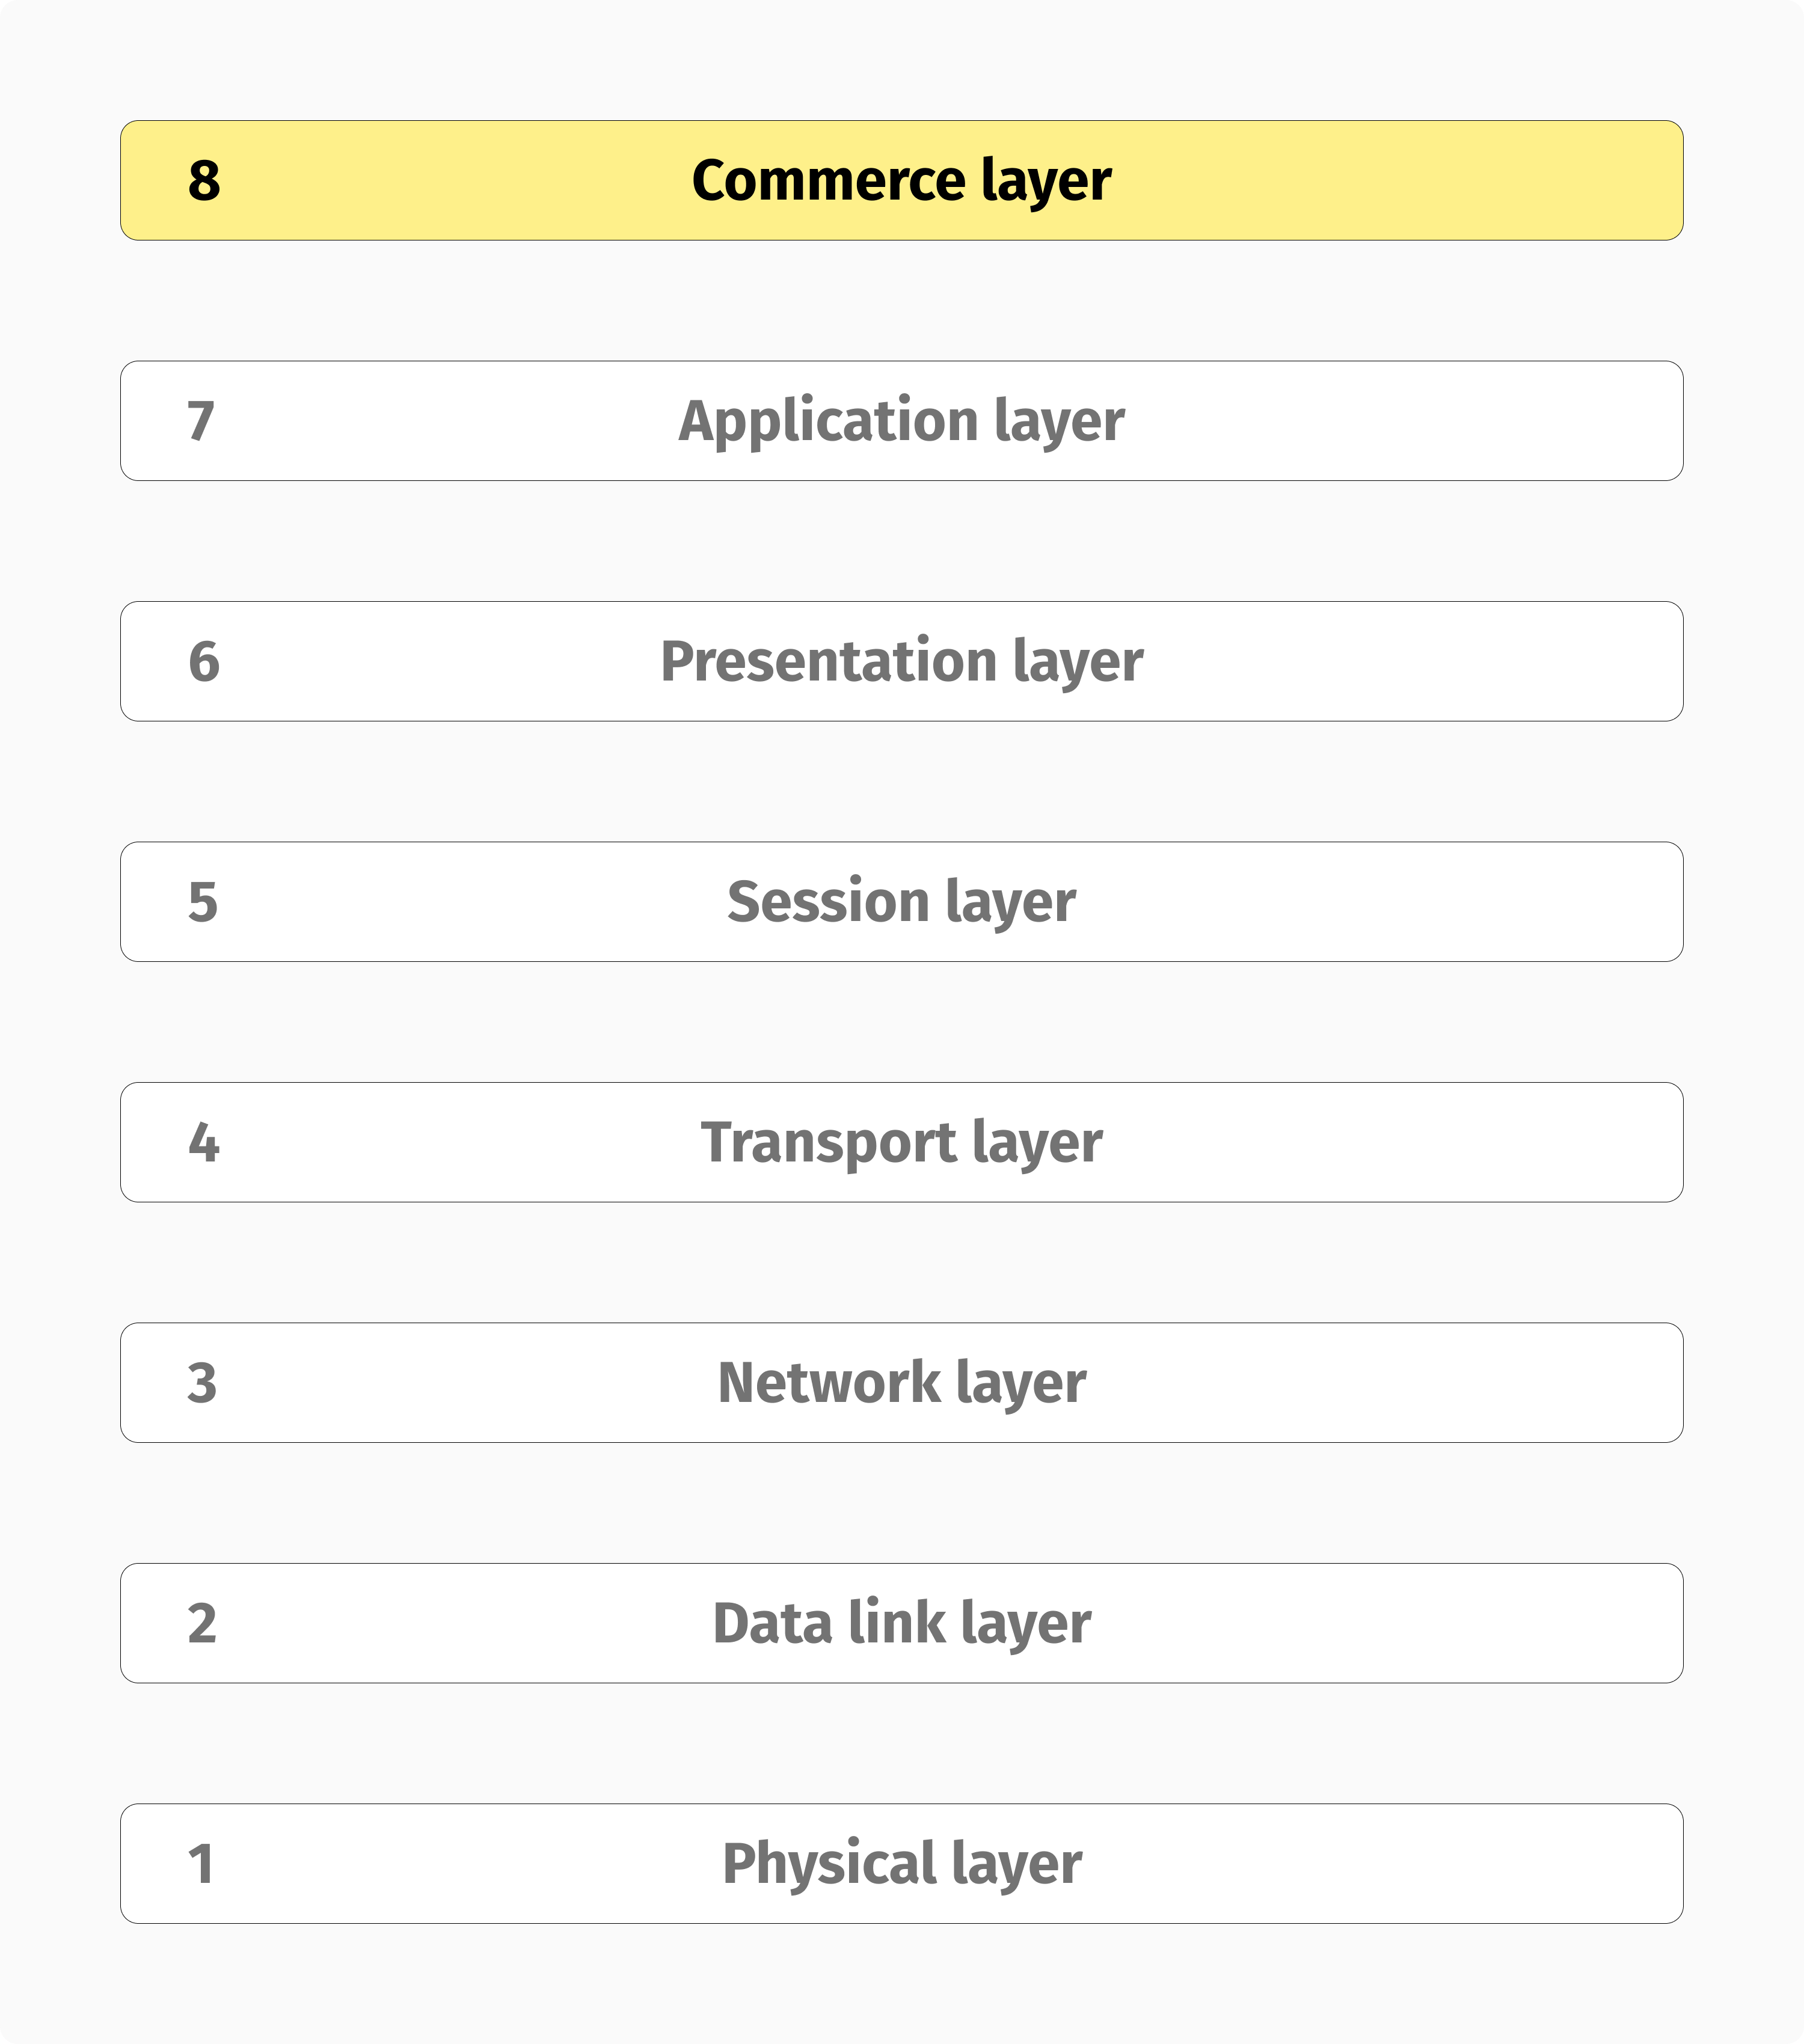 The commerce layer is the OSI model's missing layer.